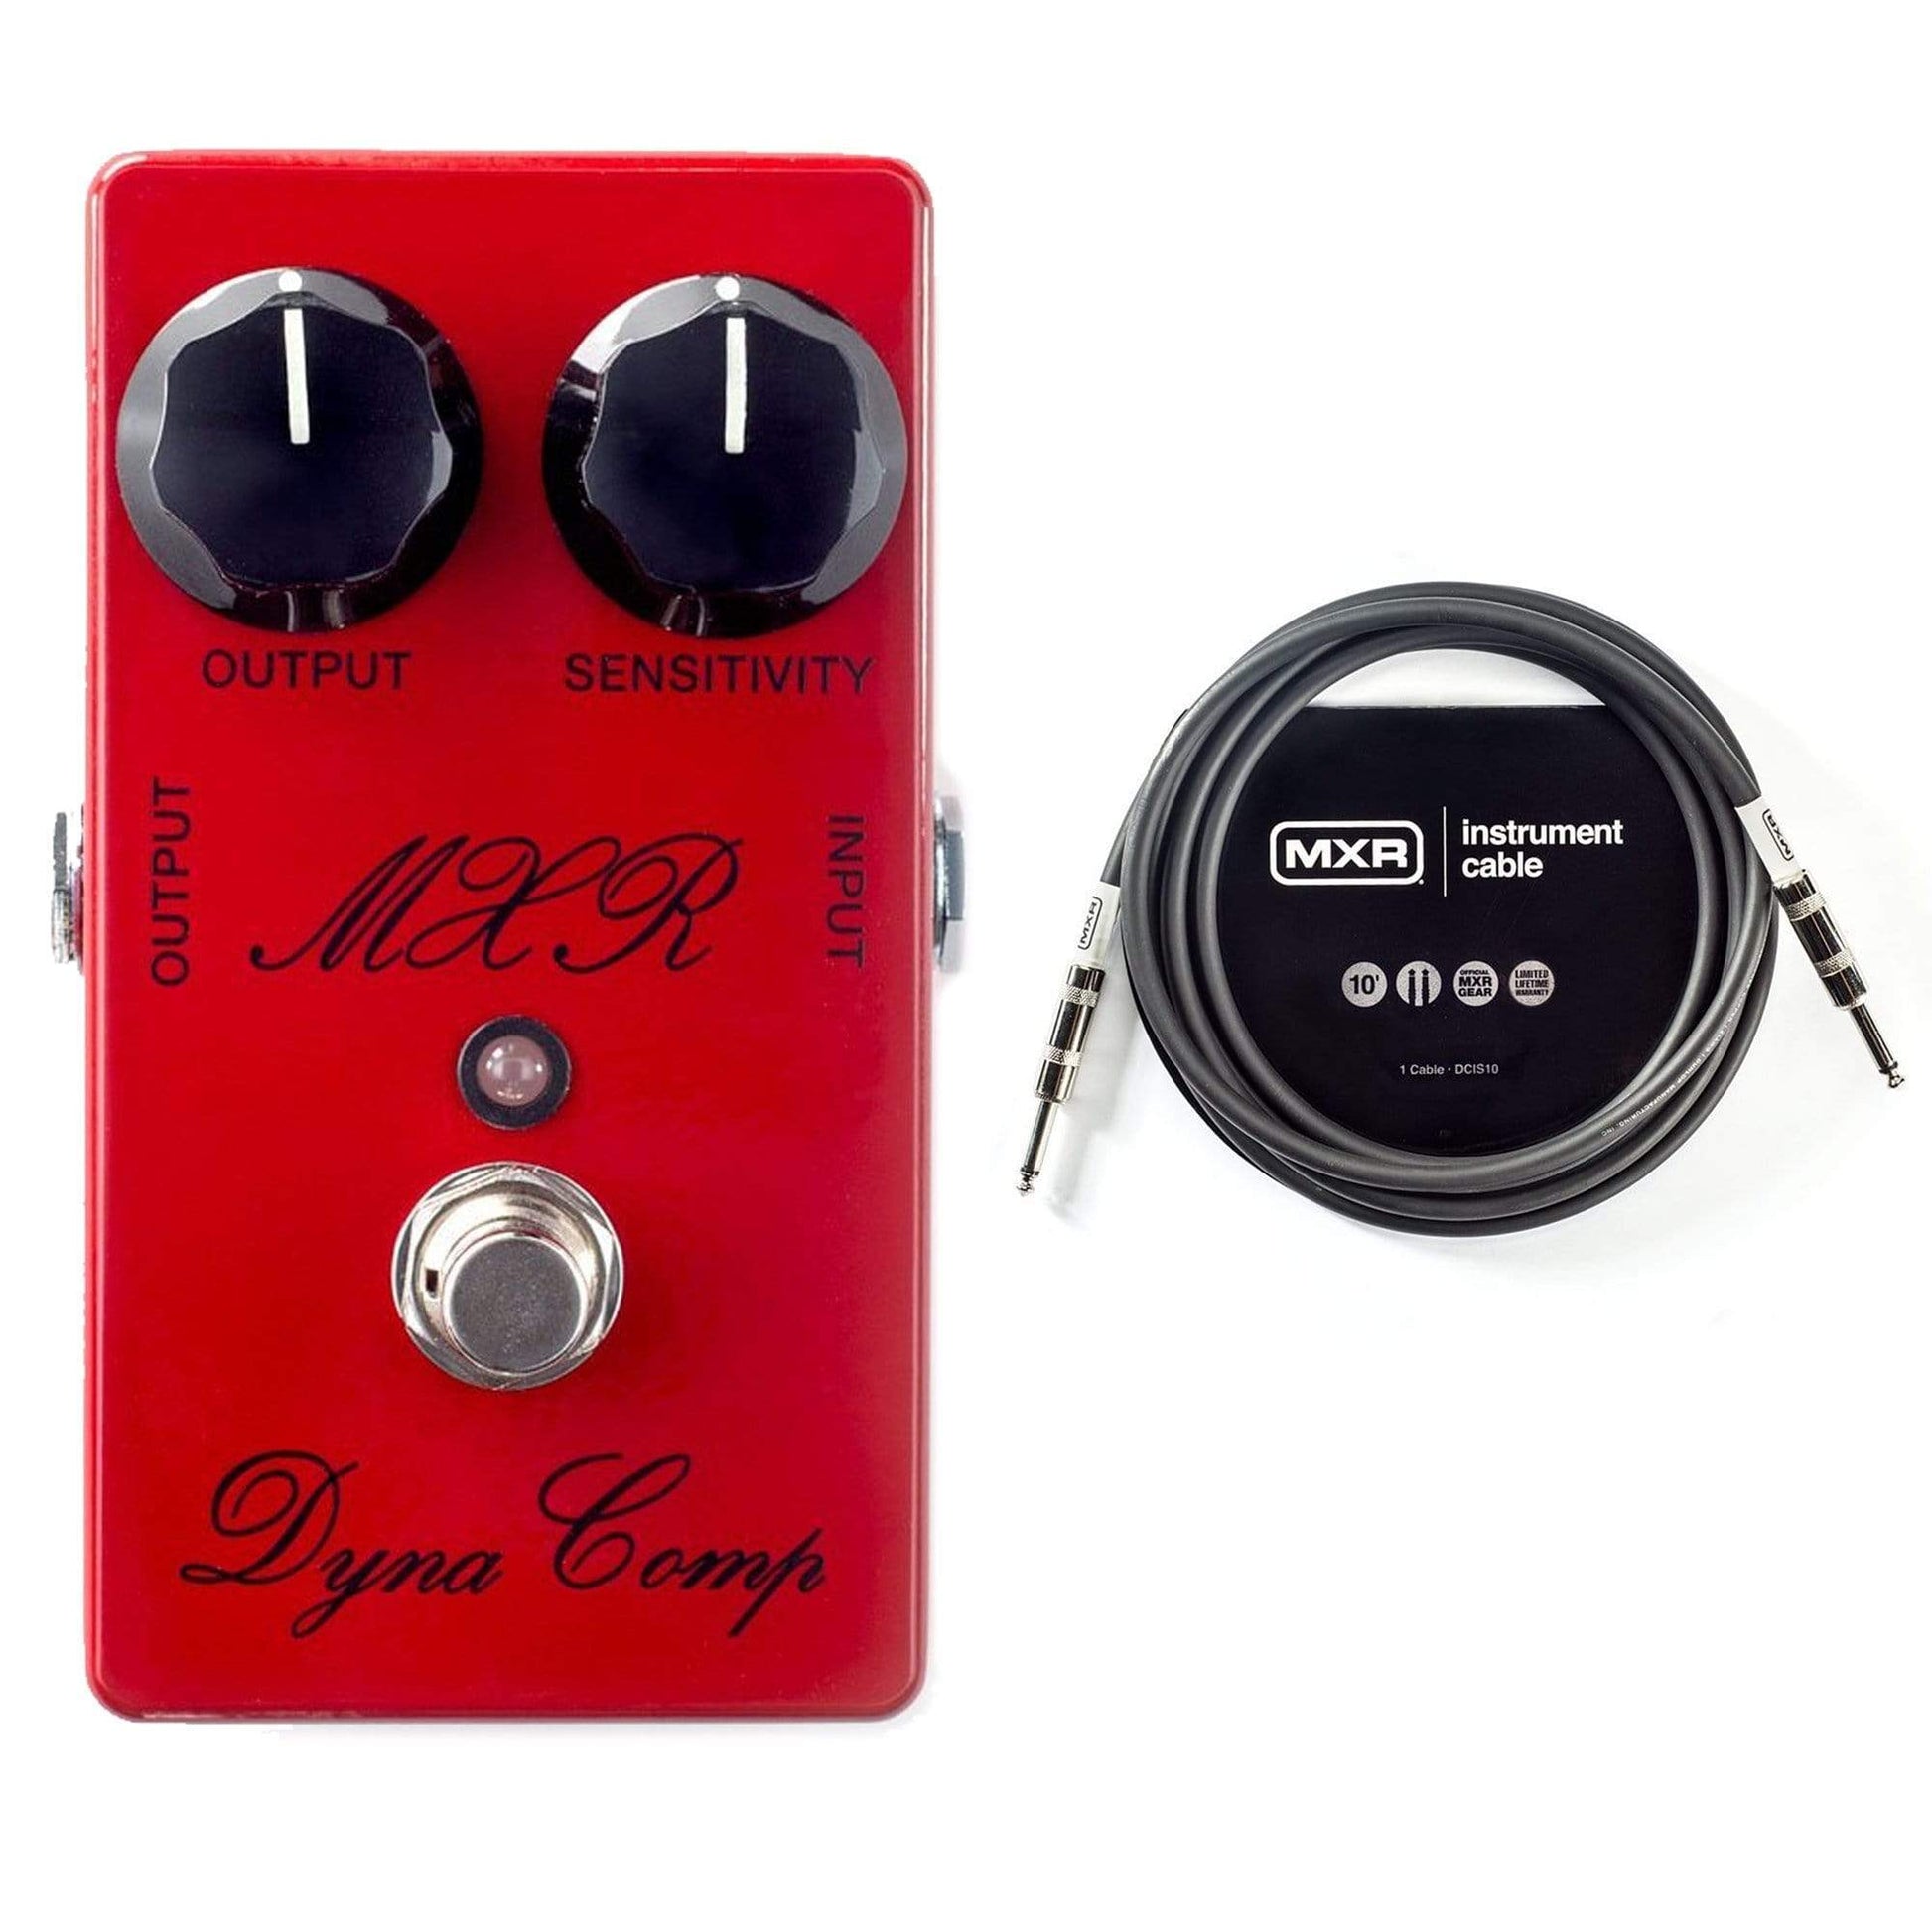 MXR Custom Shop CSP-102SL Vintage DynaComp Bundle W/MXR 10ft Instrument Cable Effects and Pedals / Compression and Sustain